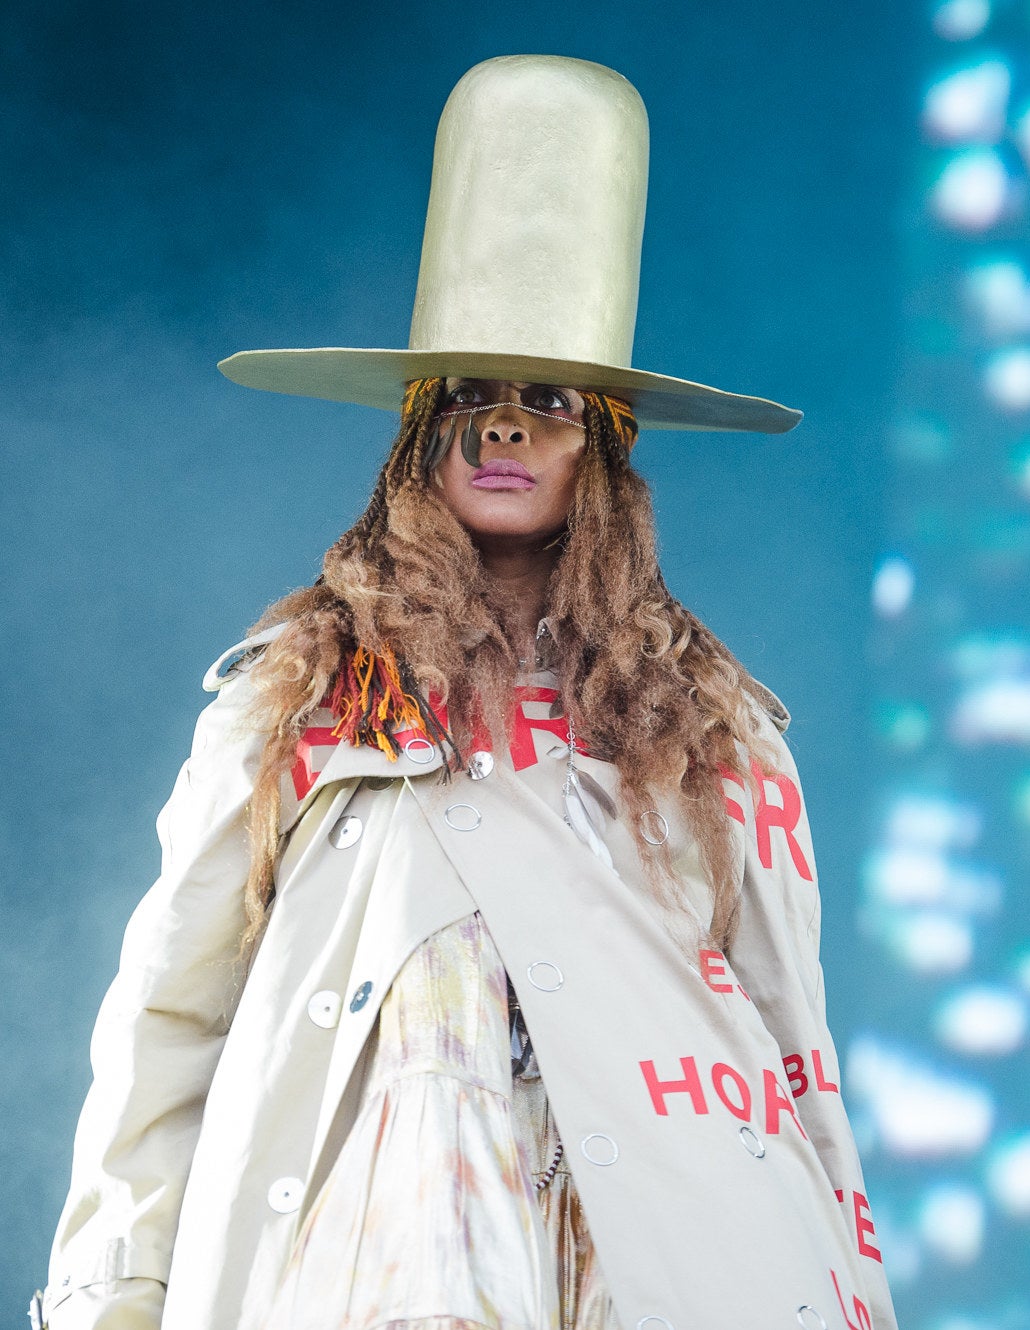 Erykah wearing a tall top hat on stage